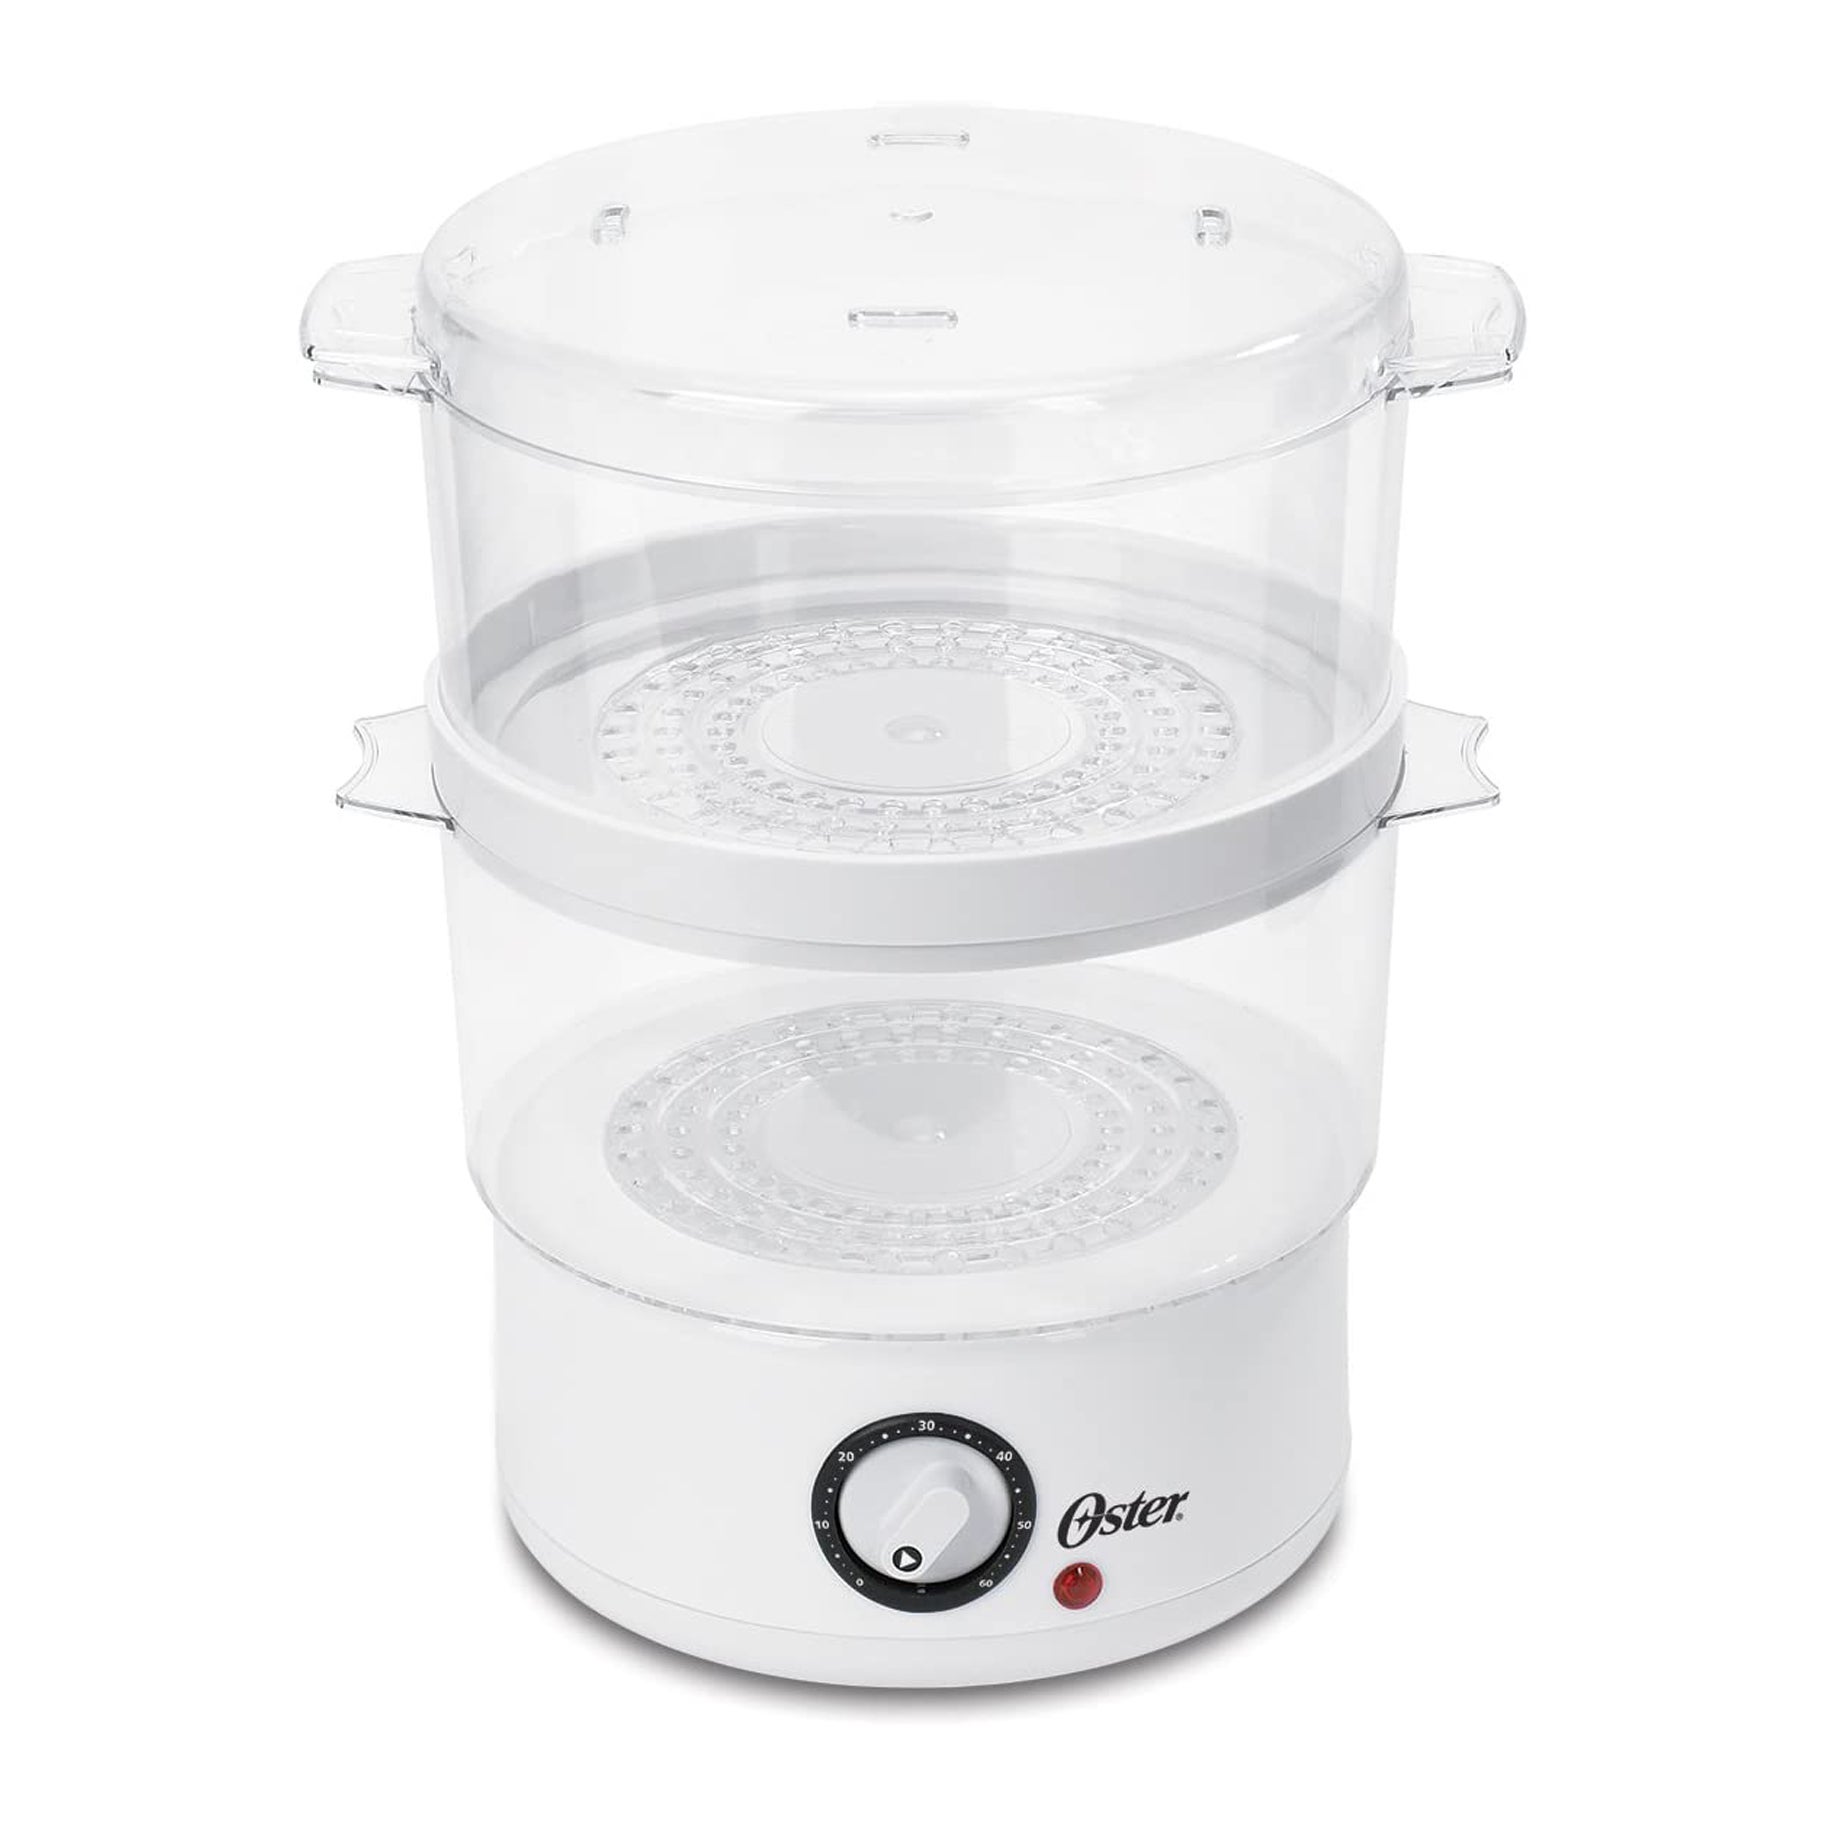 The Best Food Steamer of 2020